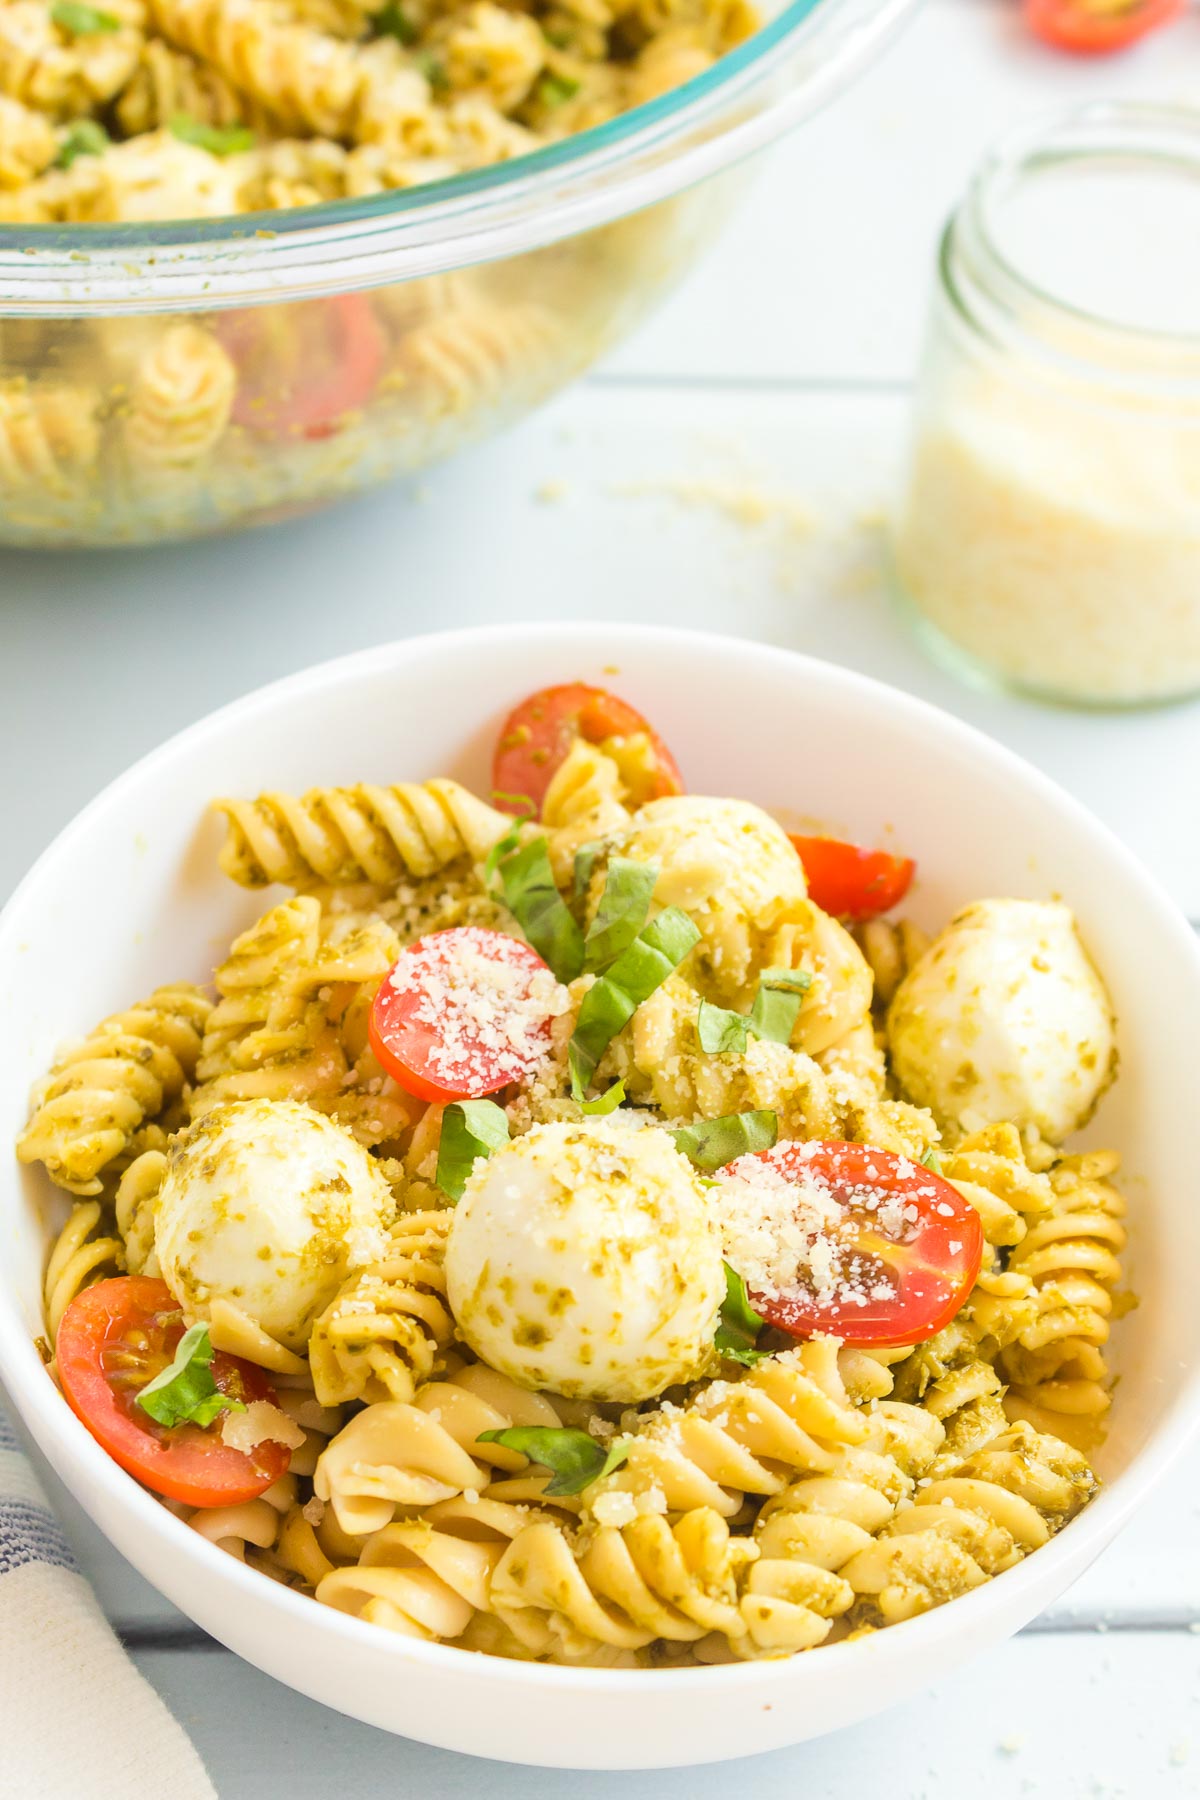 A bowl of pesto pasta salad at an angle topped with parmesan cheese with a larger bowl of pasta salad in the background/